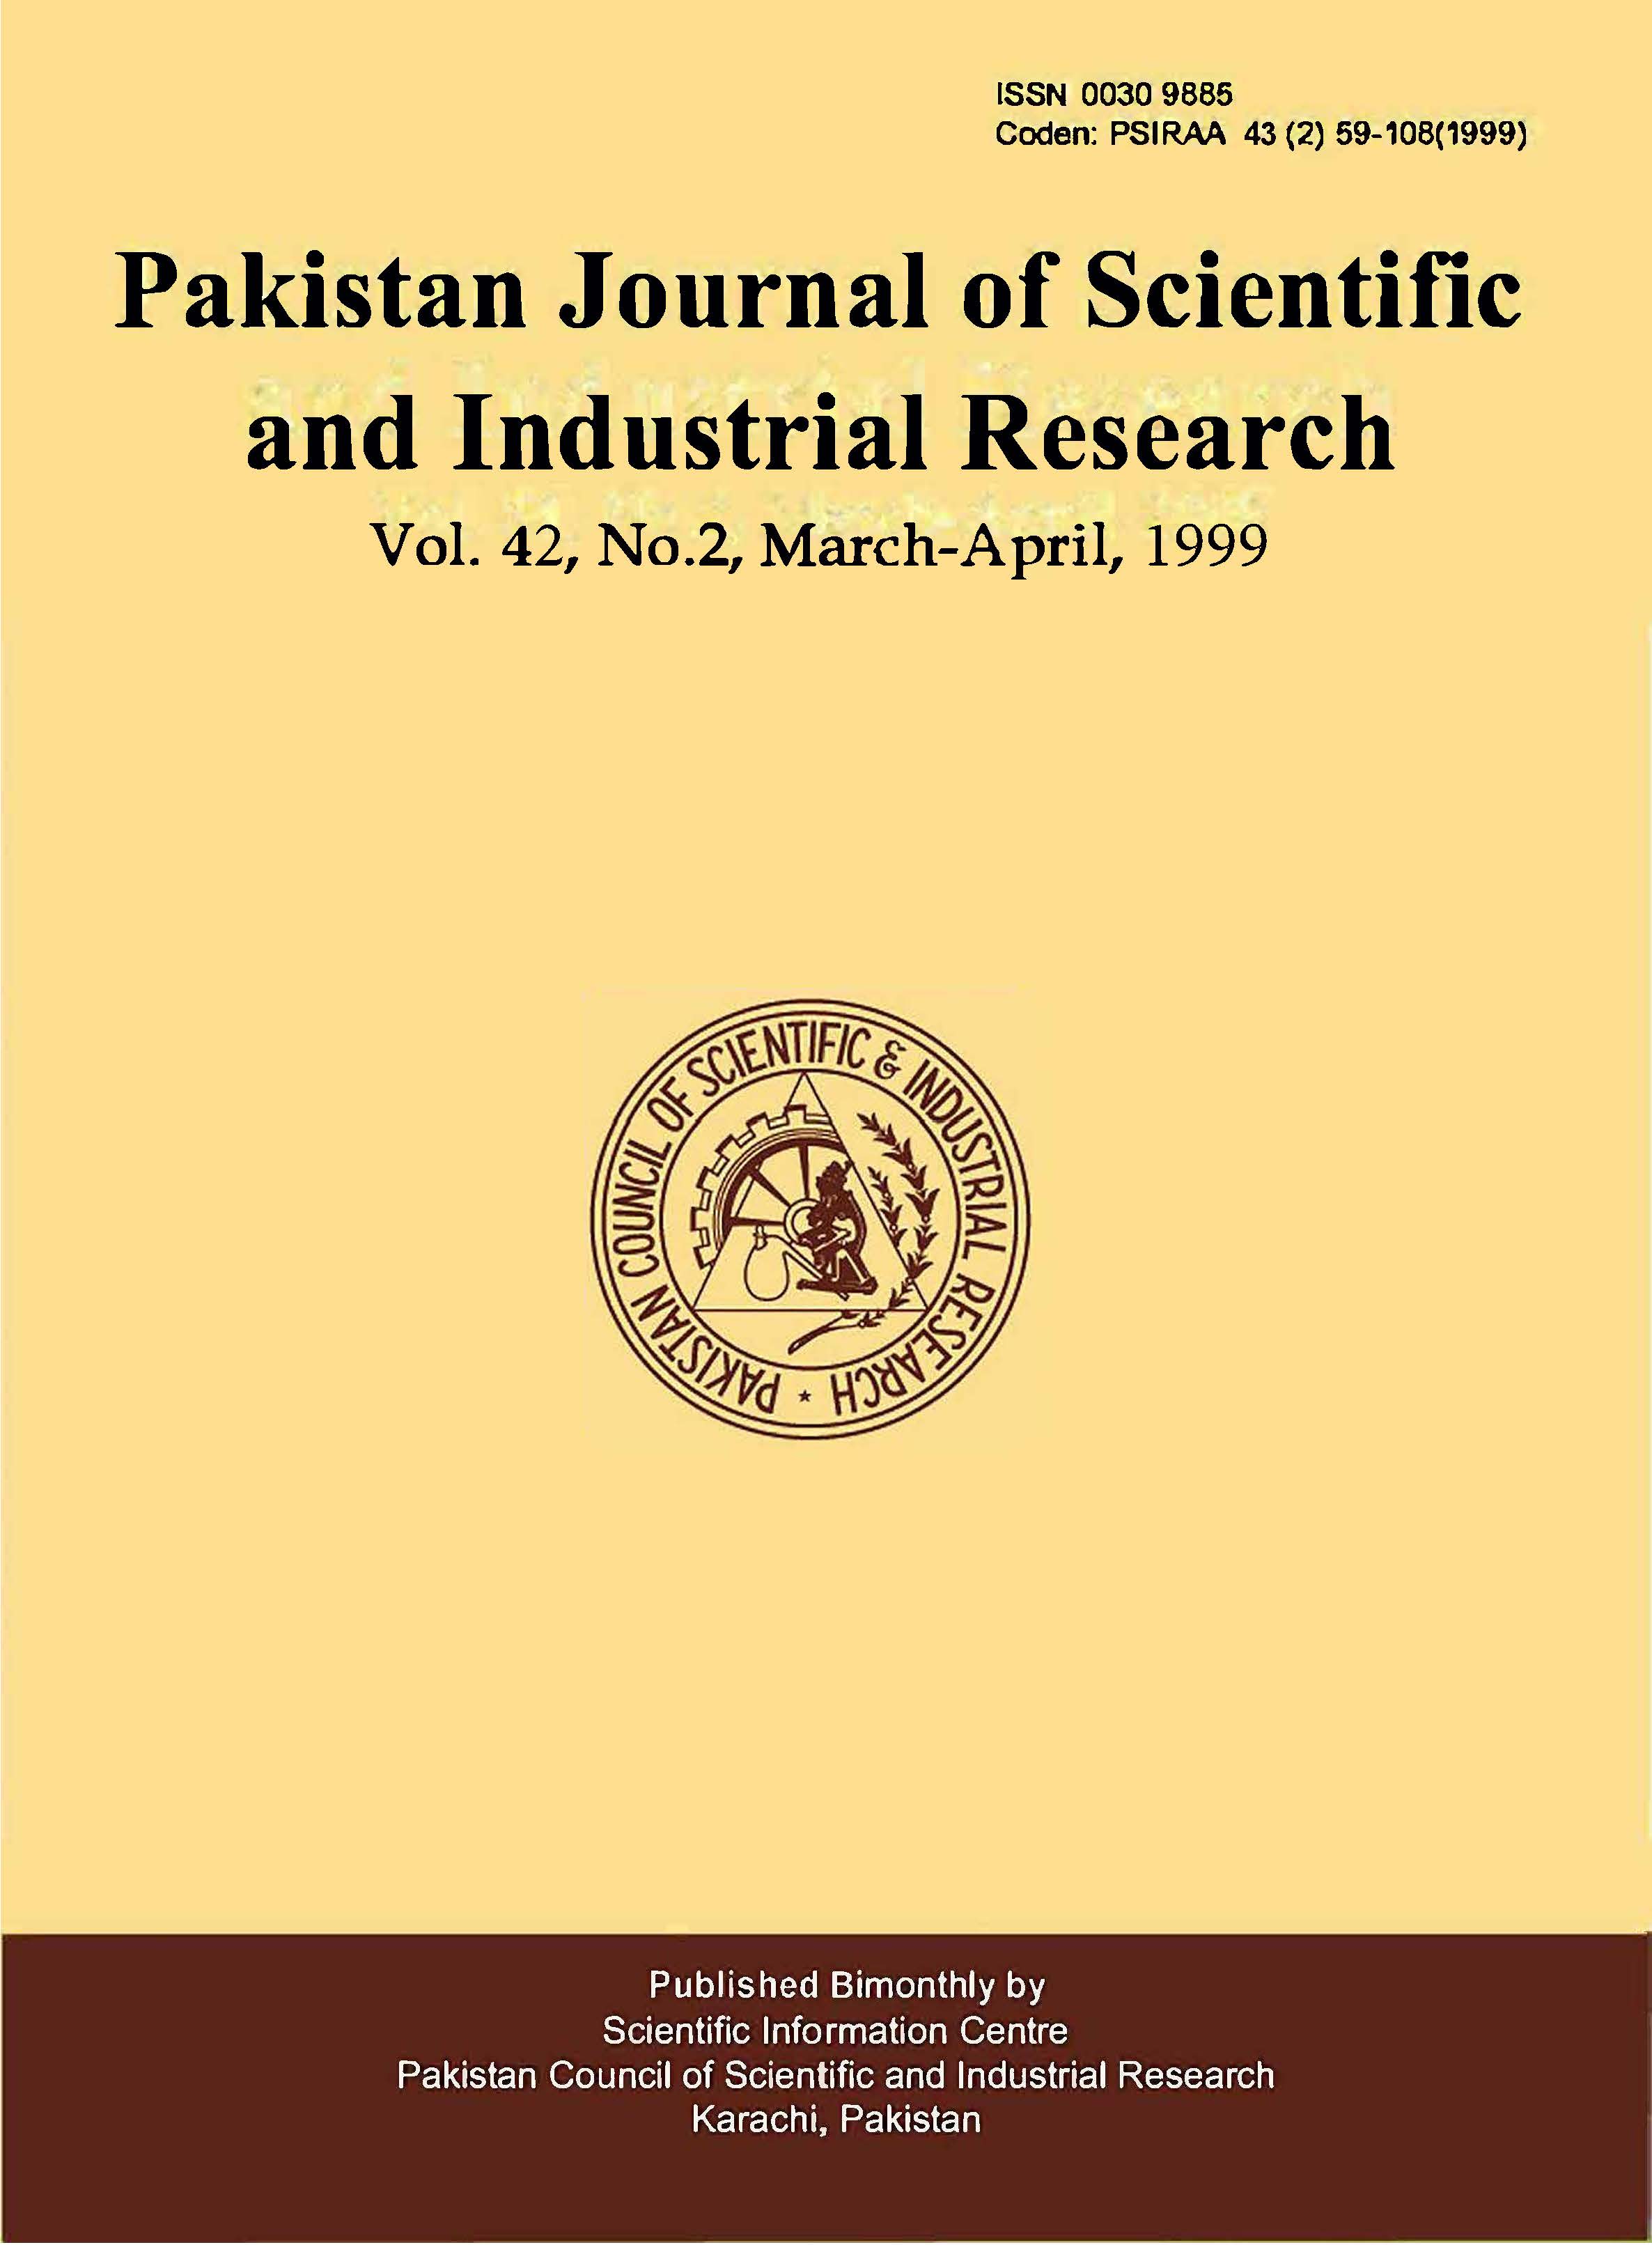 					View Vol. 42 No. 2 (1999): Pakistan Journal of Scientific and Industrial Research
				